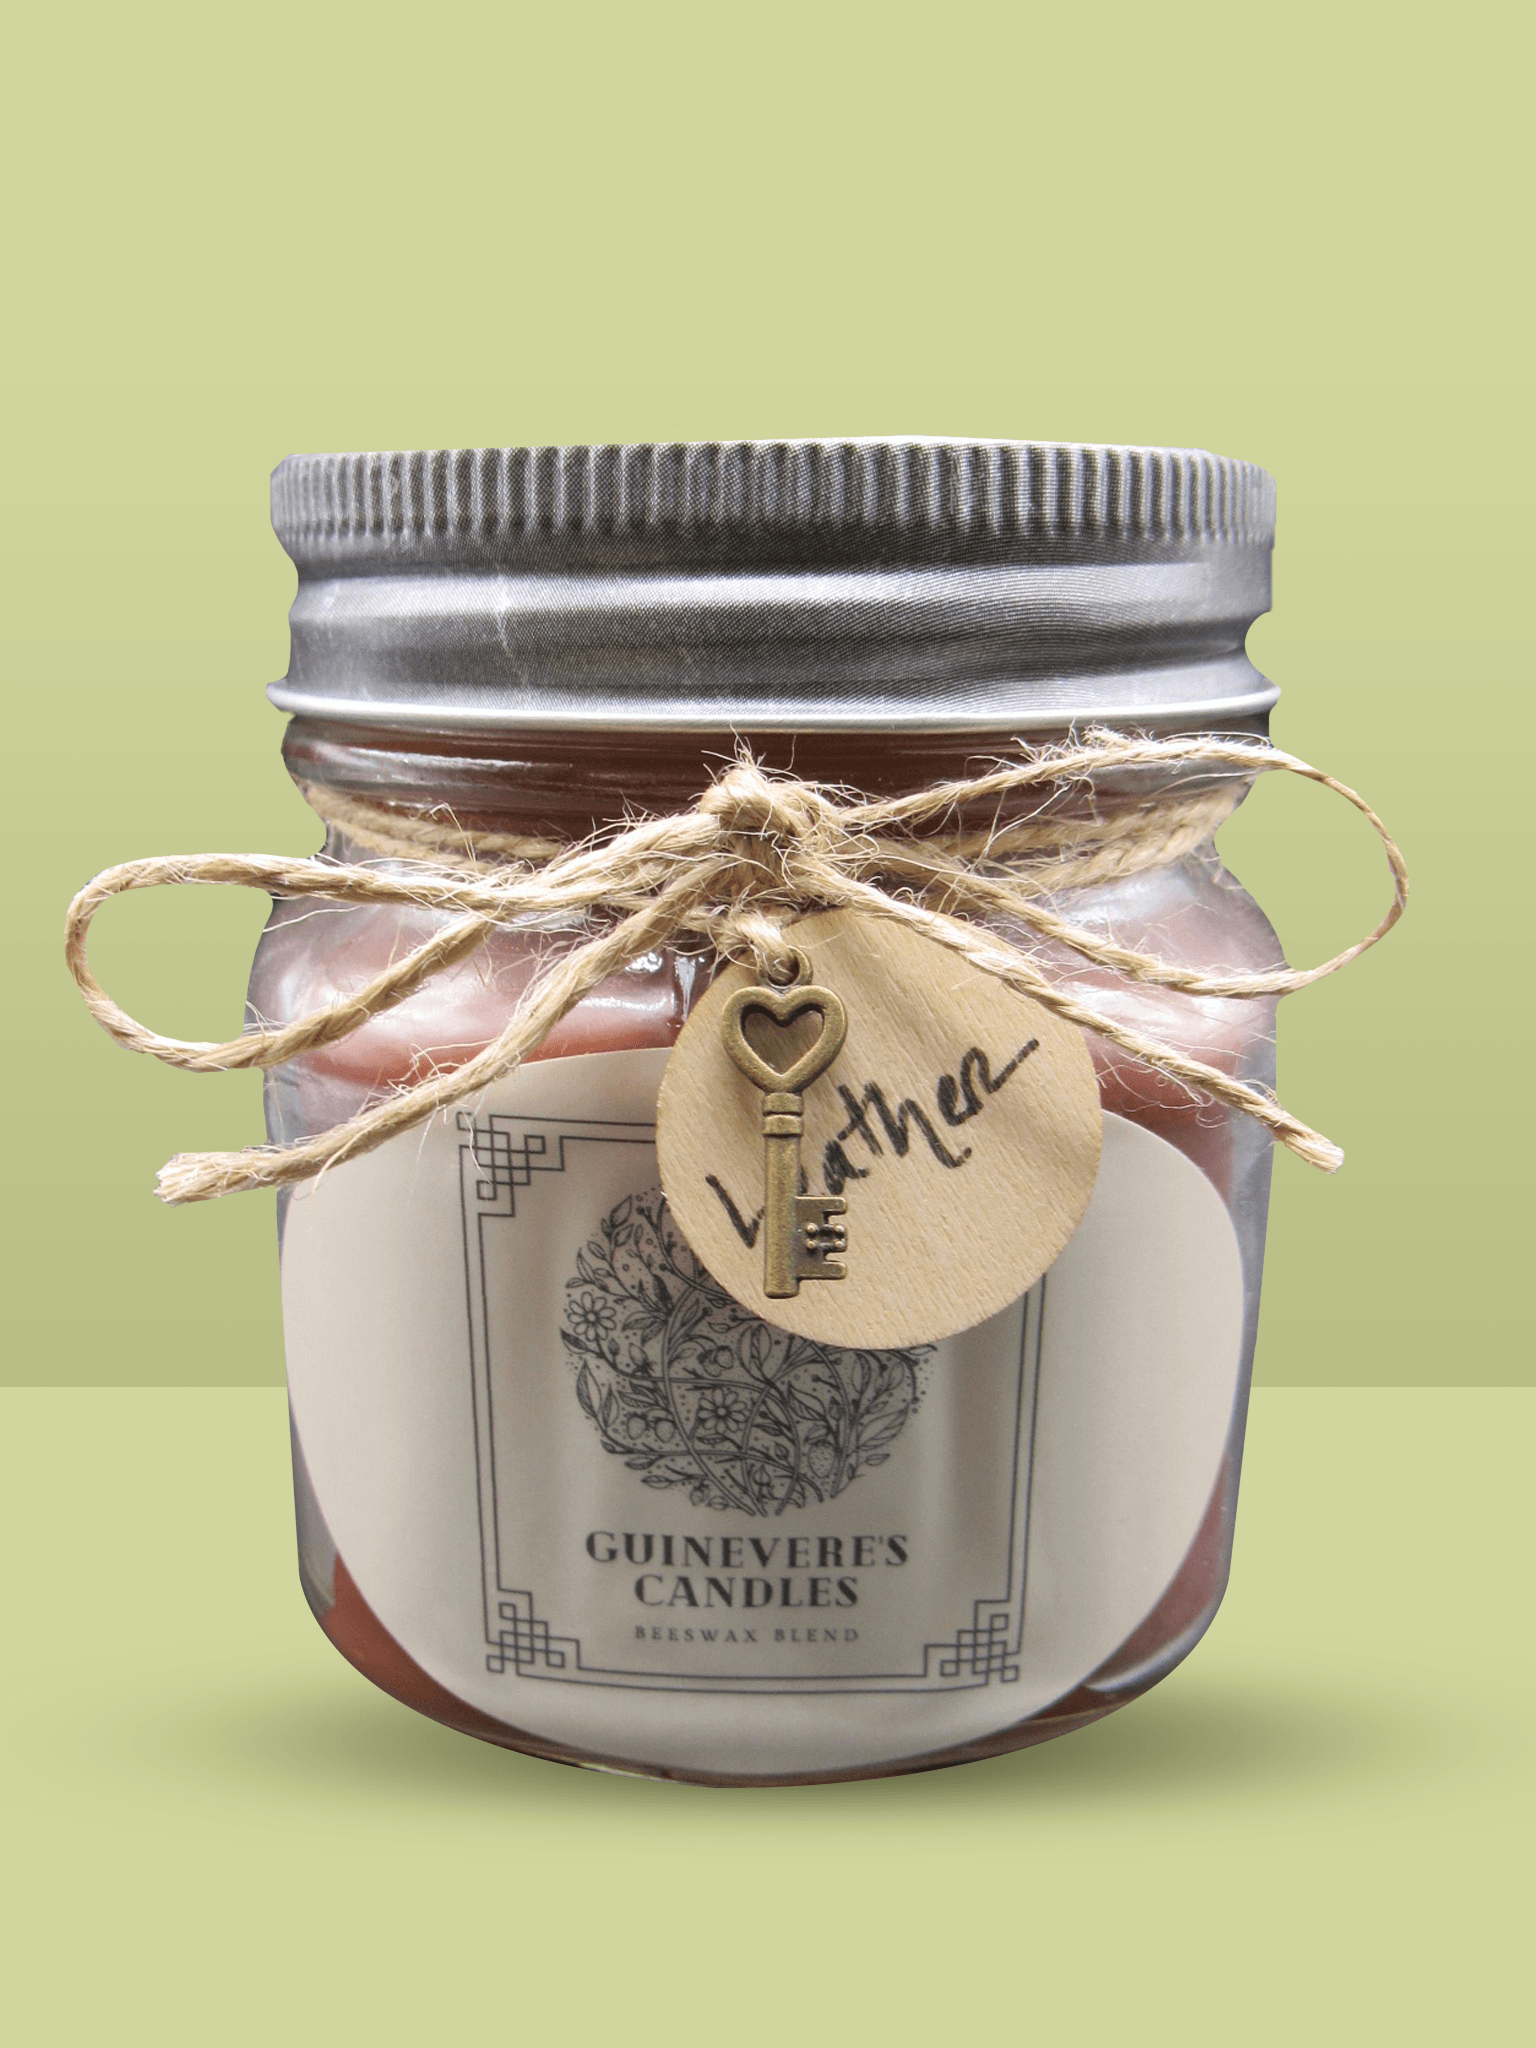 Guinevere's Jar Candles